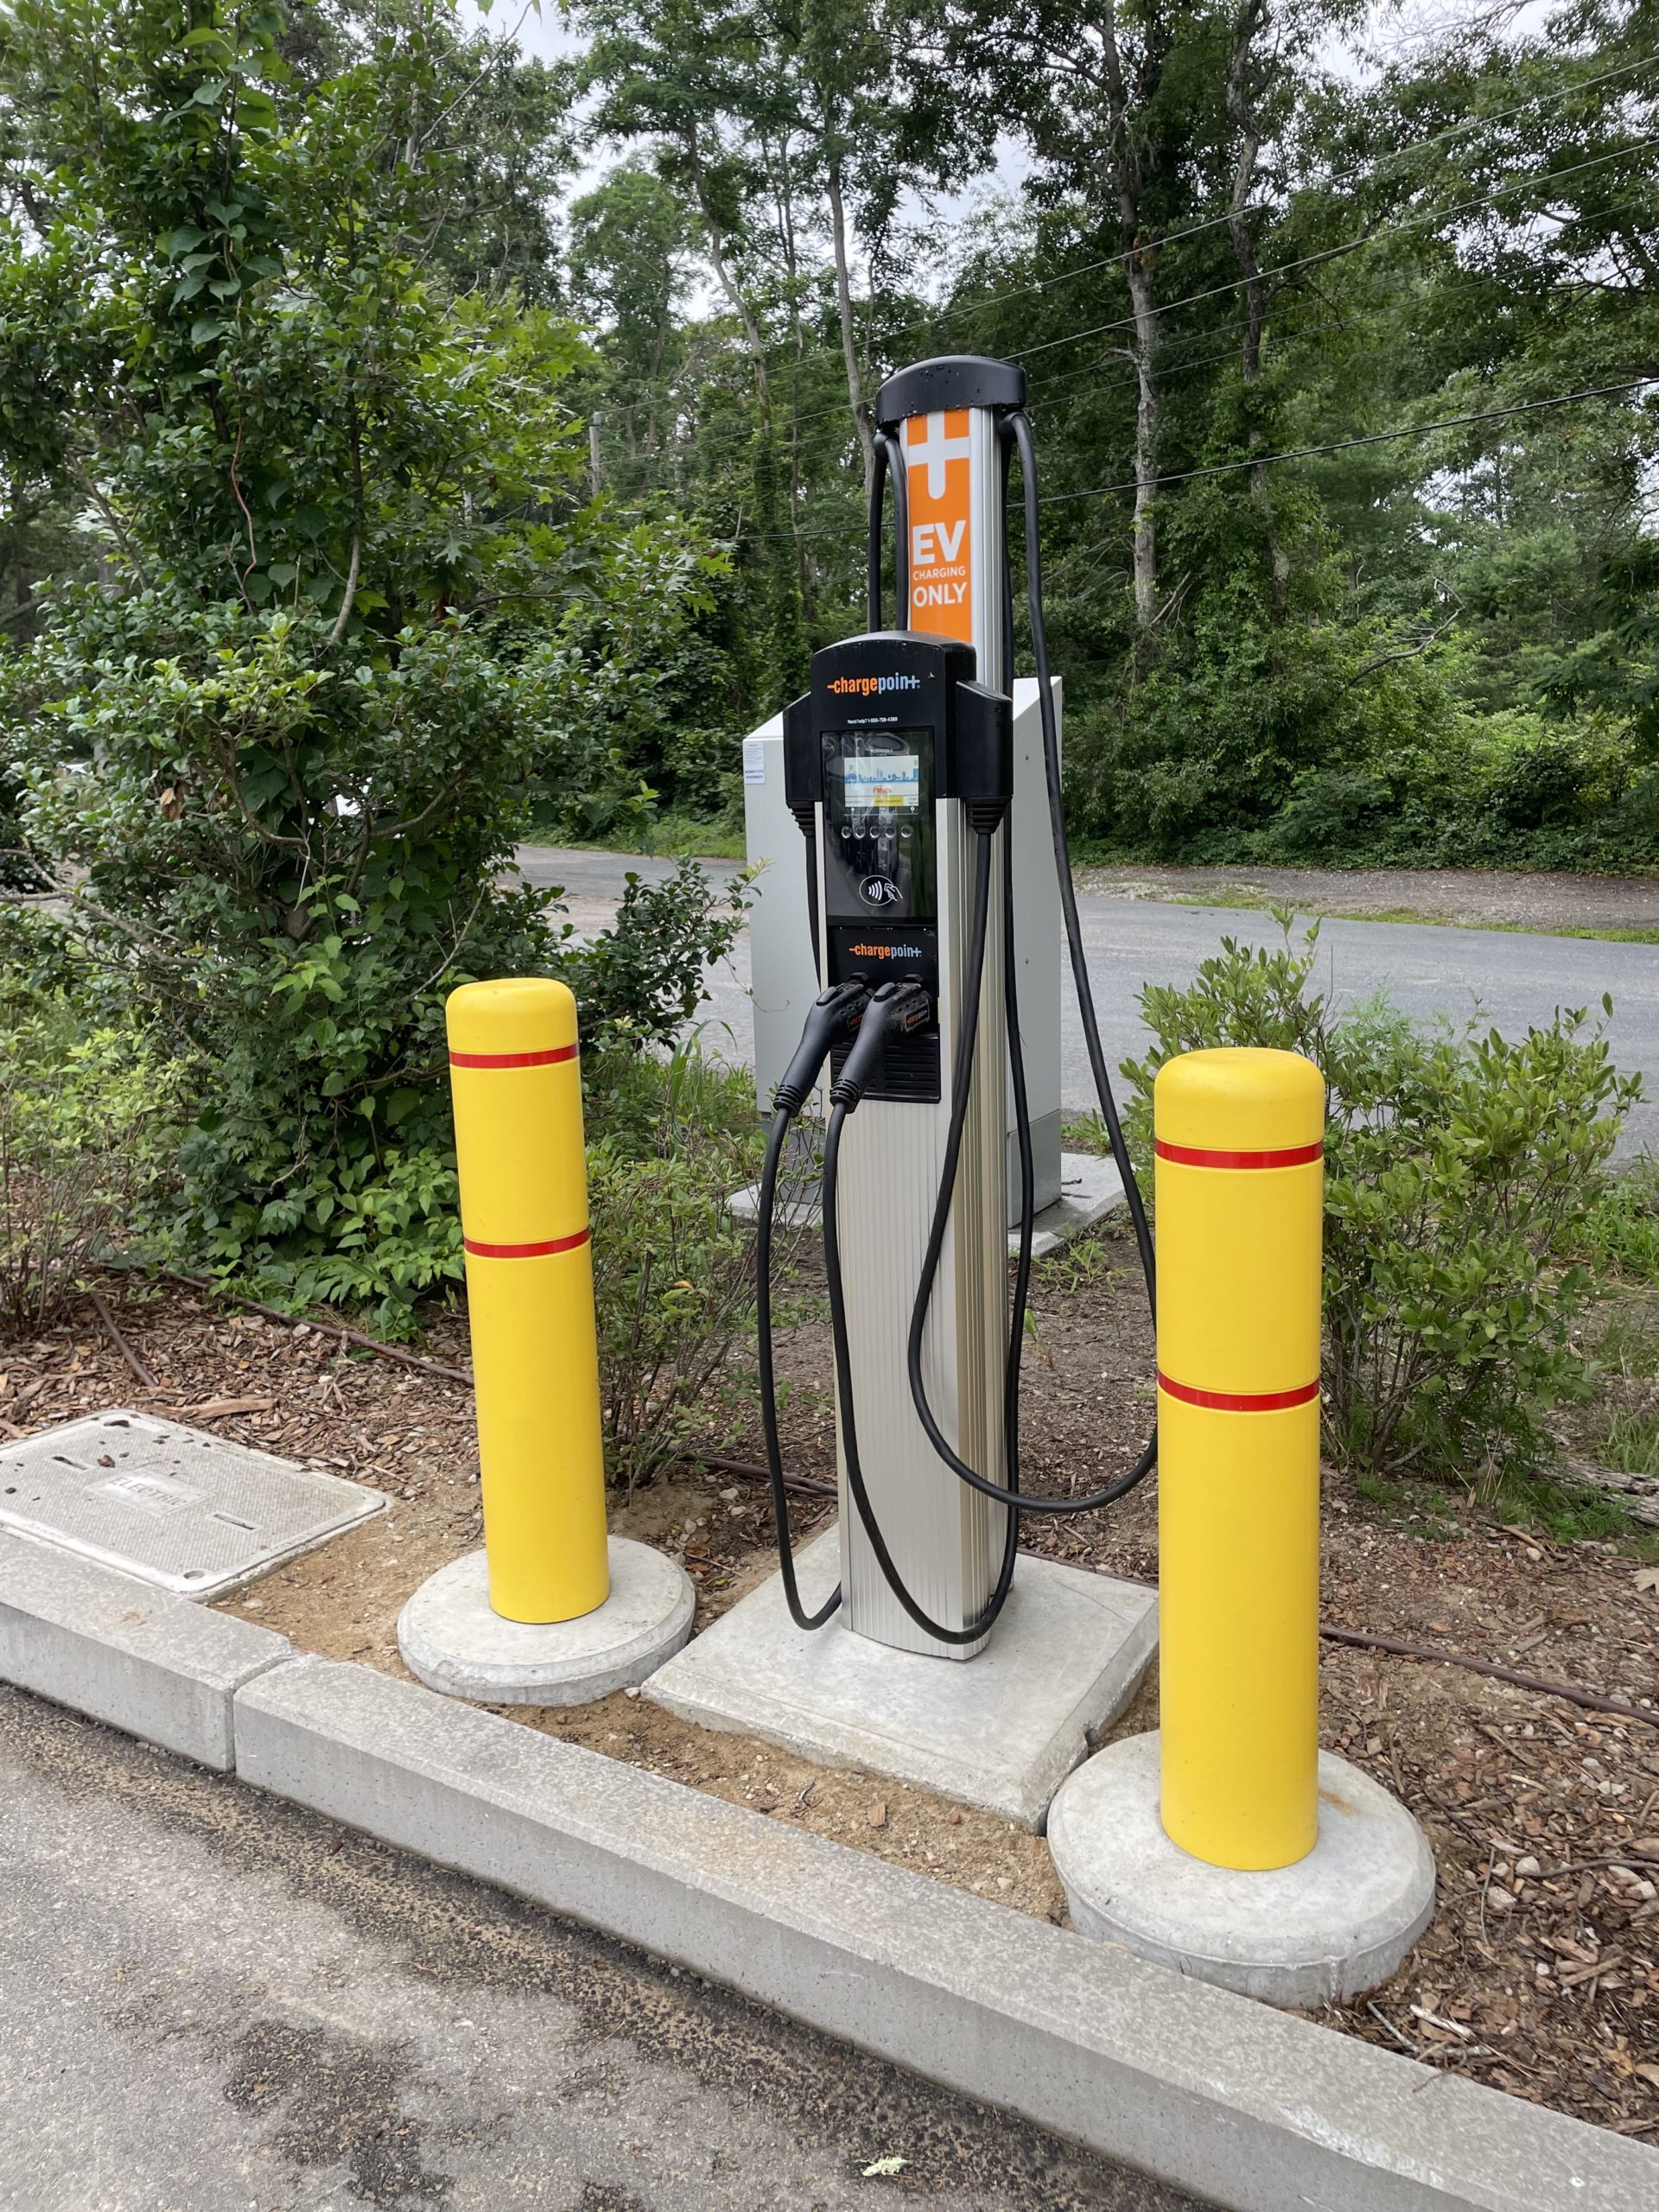 eversource-installs-ev-charging-stations-at-heritage-museums-gardens